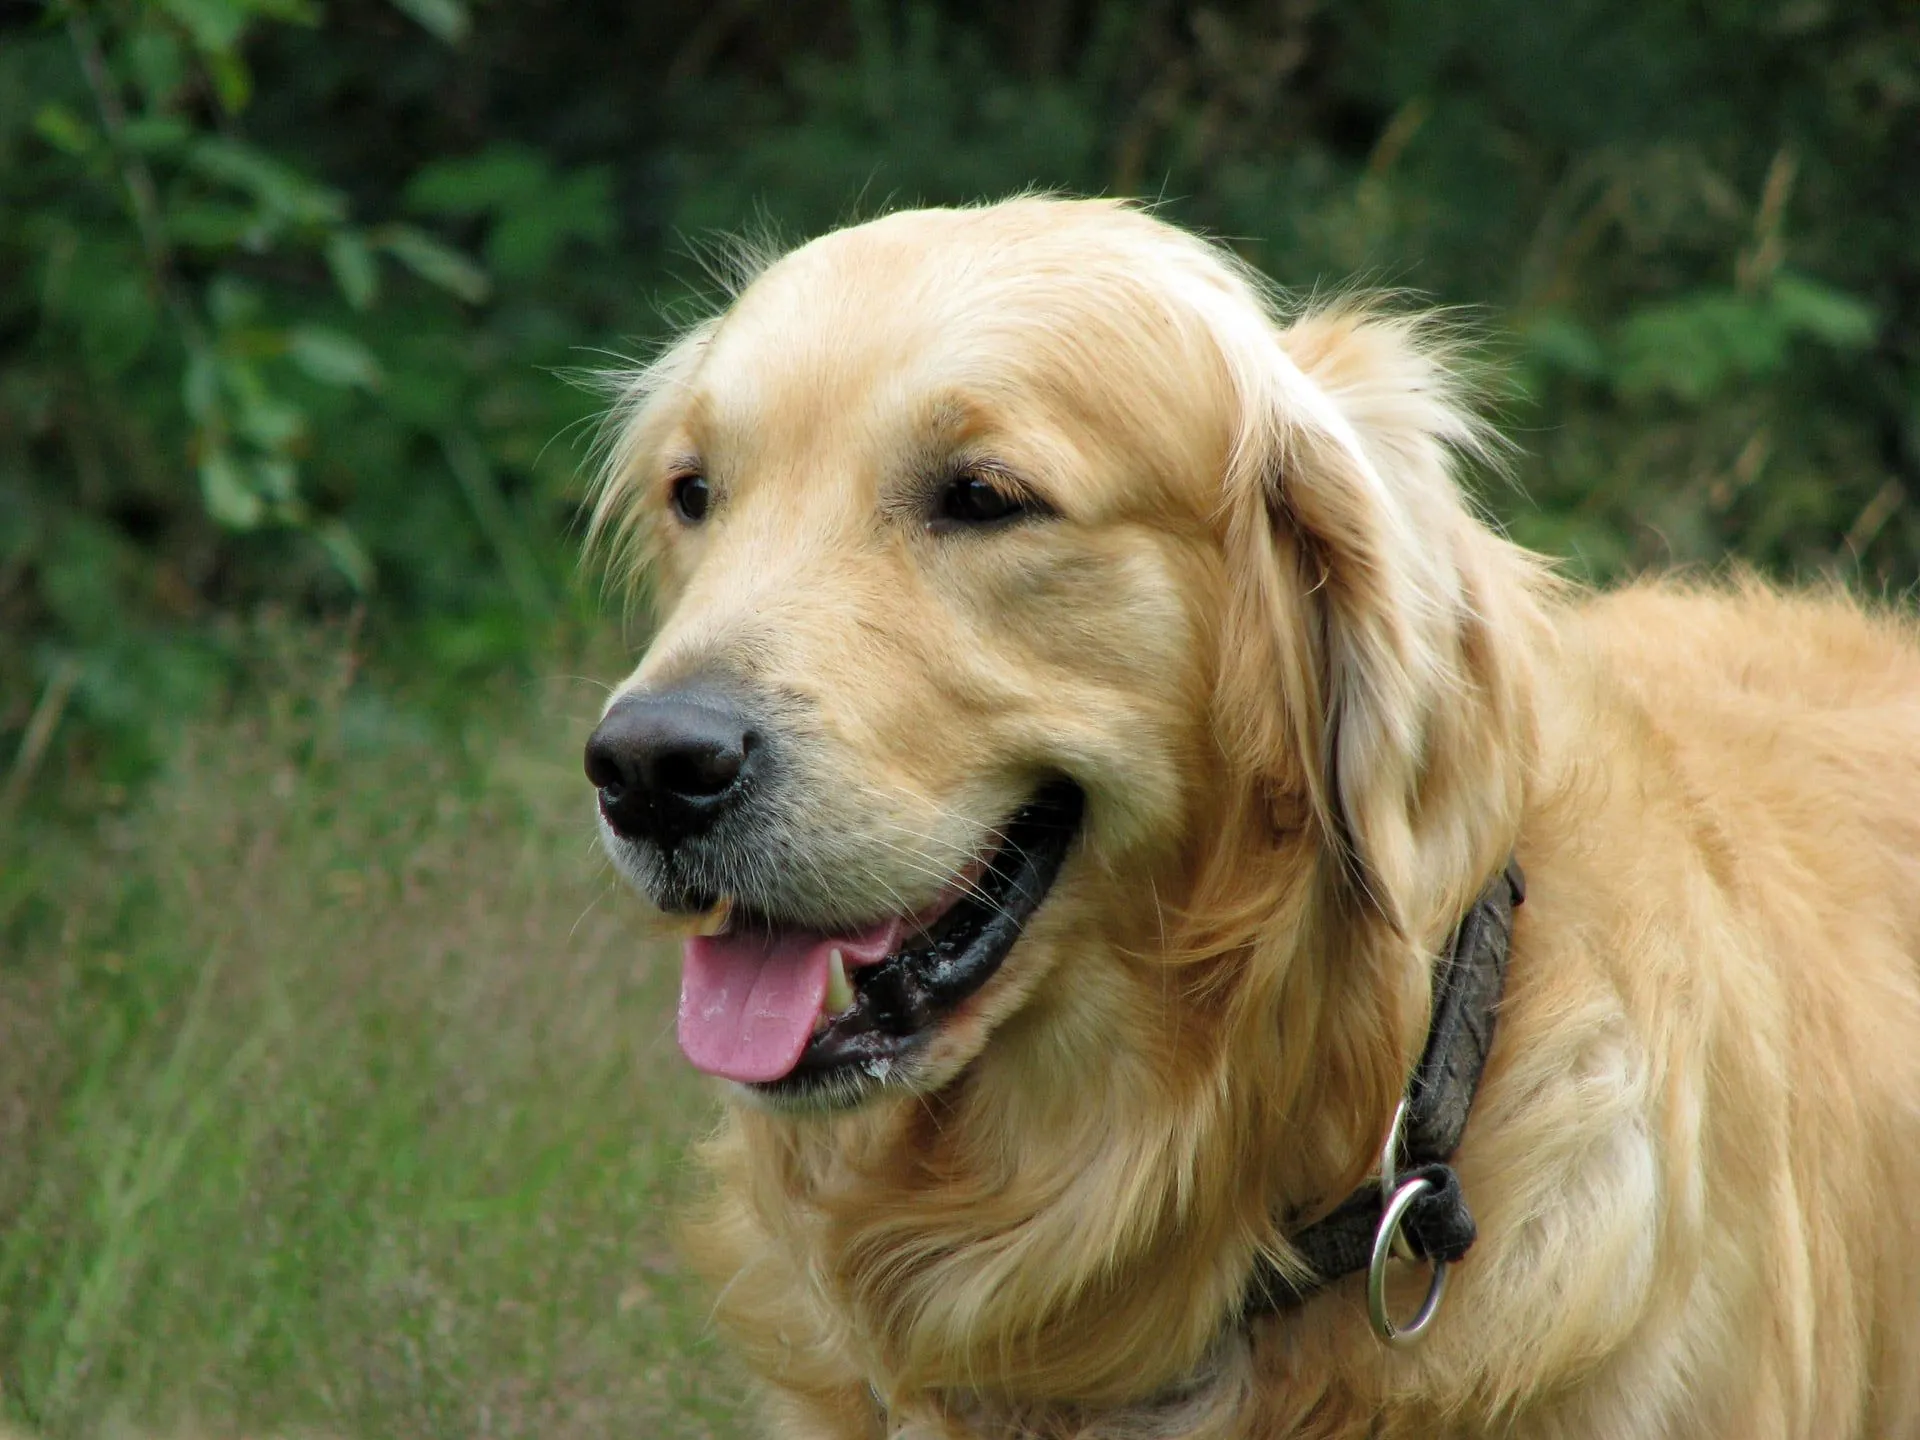 Retrievers have different coat colors, and brown, white, gold, and cream are the common ones.